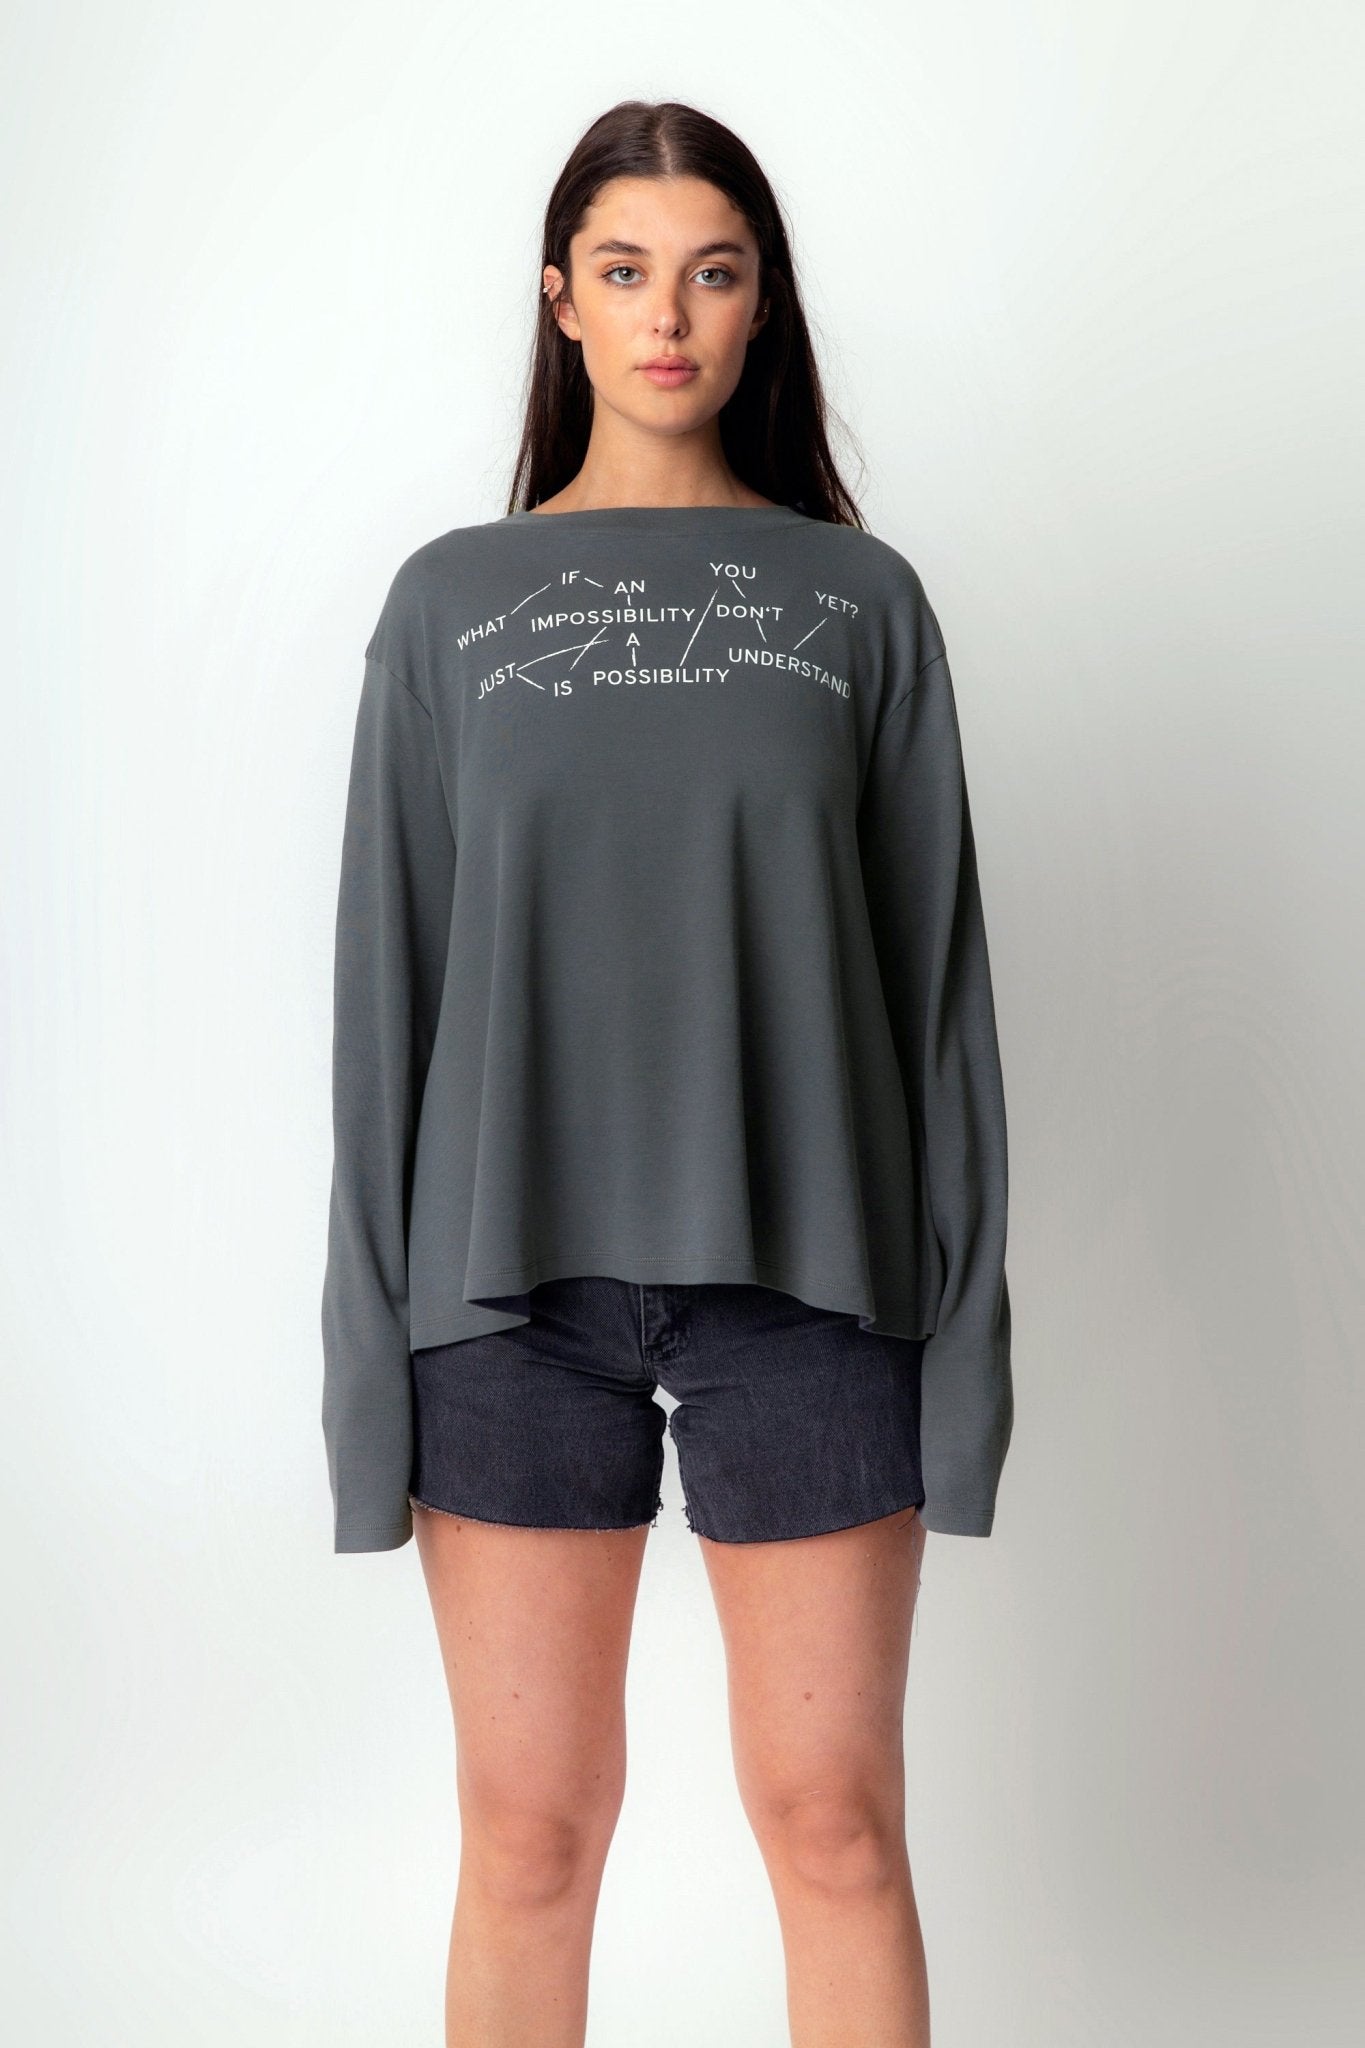 What if an impossibility is just a possibility you don't understand yet? Flowy Long Sleeve - OBLIVIOUS?